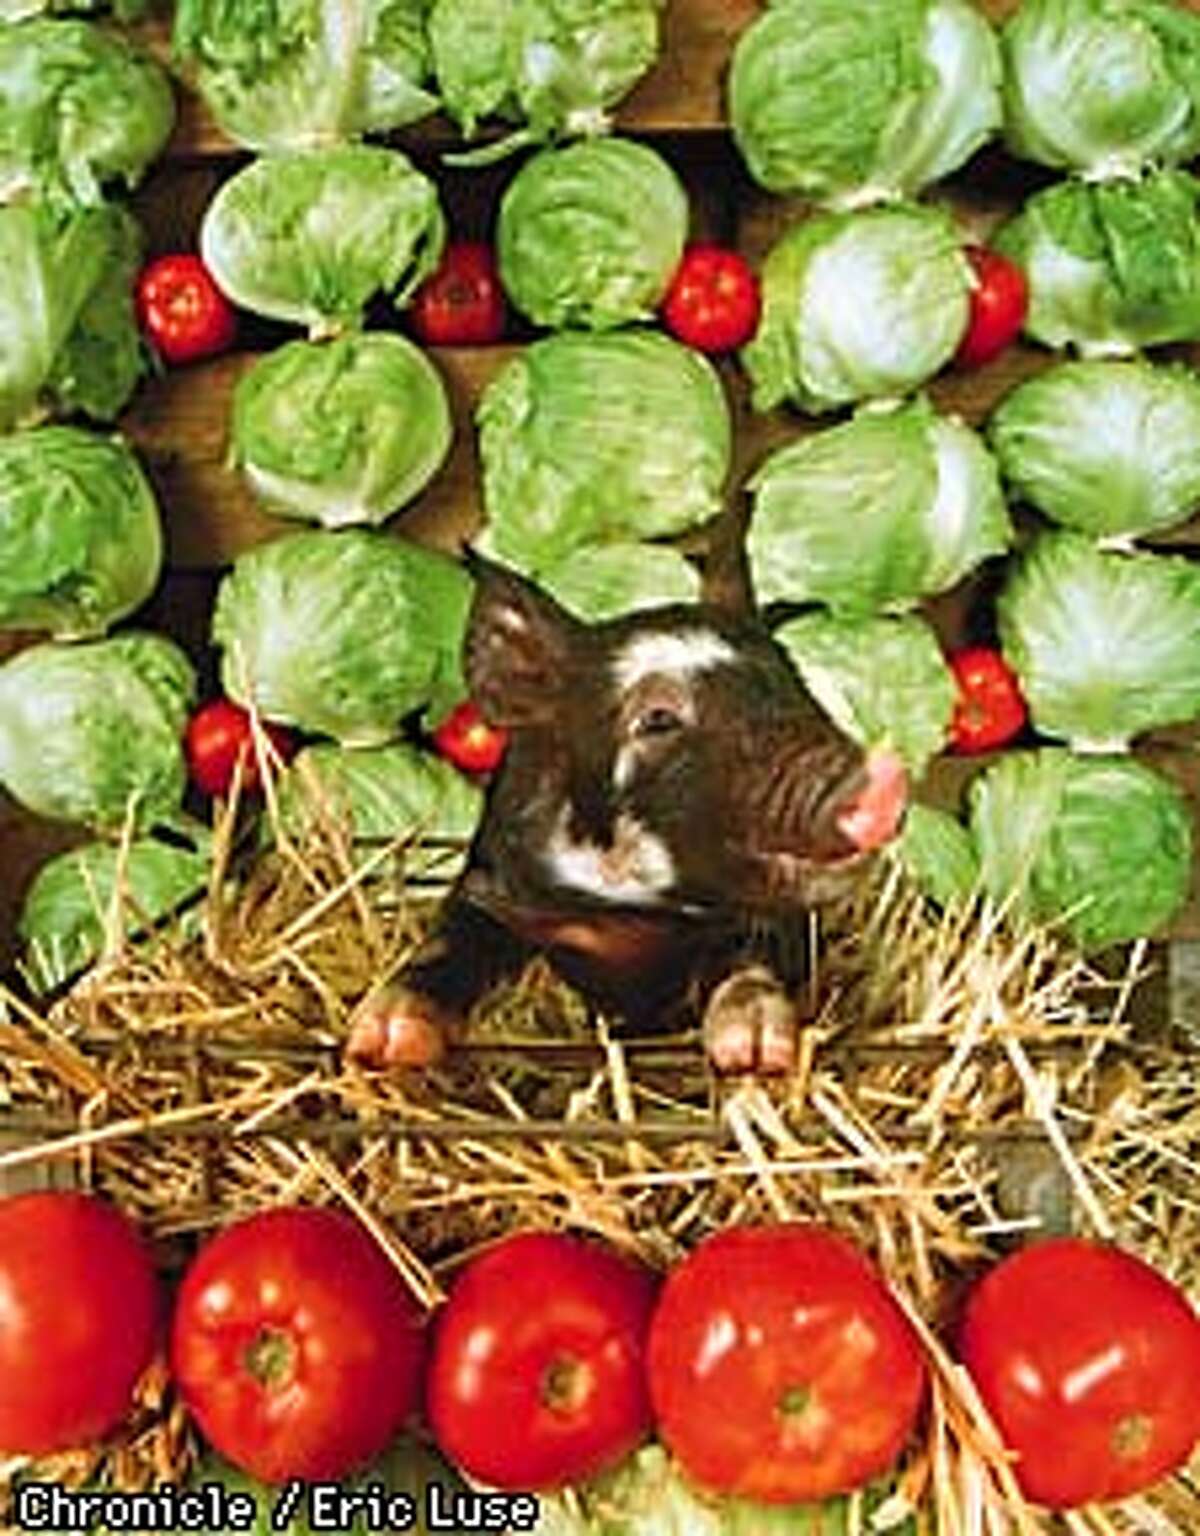 A nine day old Berkshire pig courtesy of the Durling family of Petaluma is surrounded by lettuce and tomatoes. Photo by Eric Luse Styling by Ethel Brennan